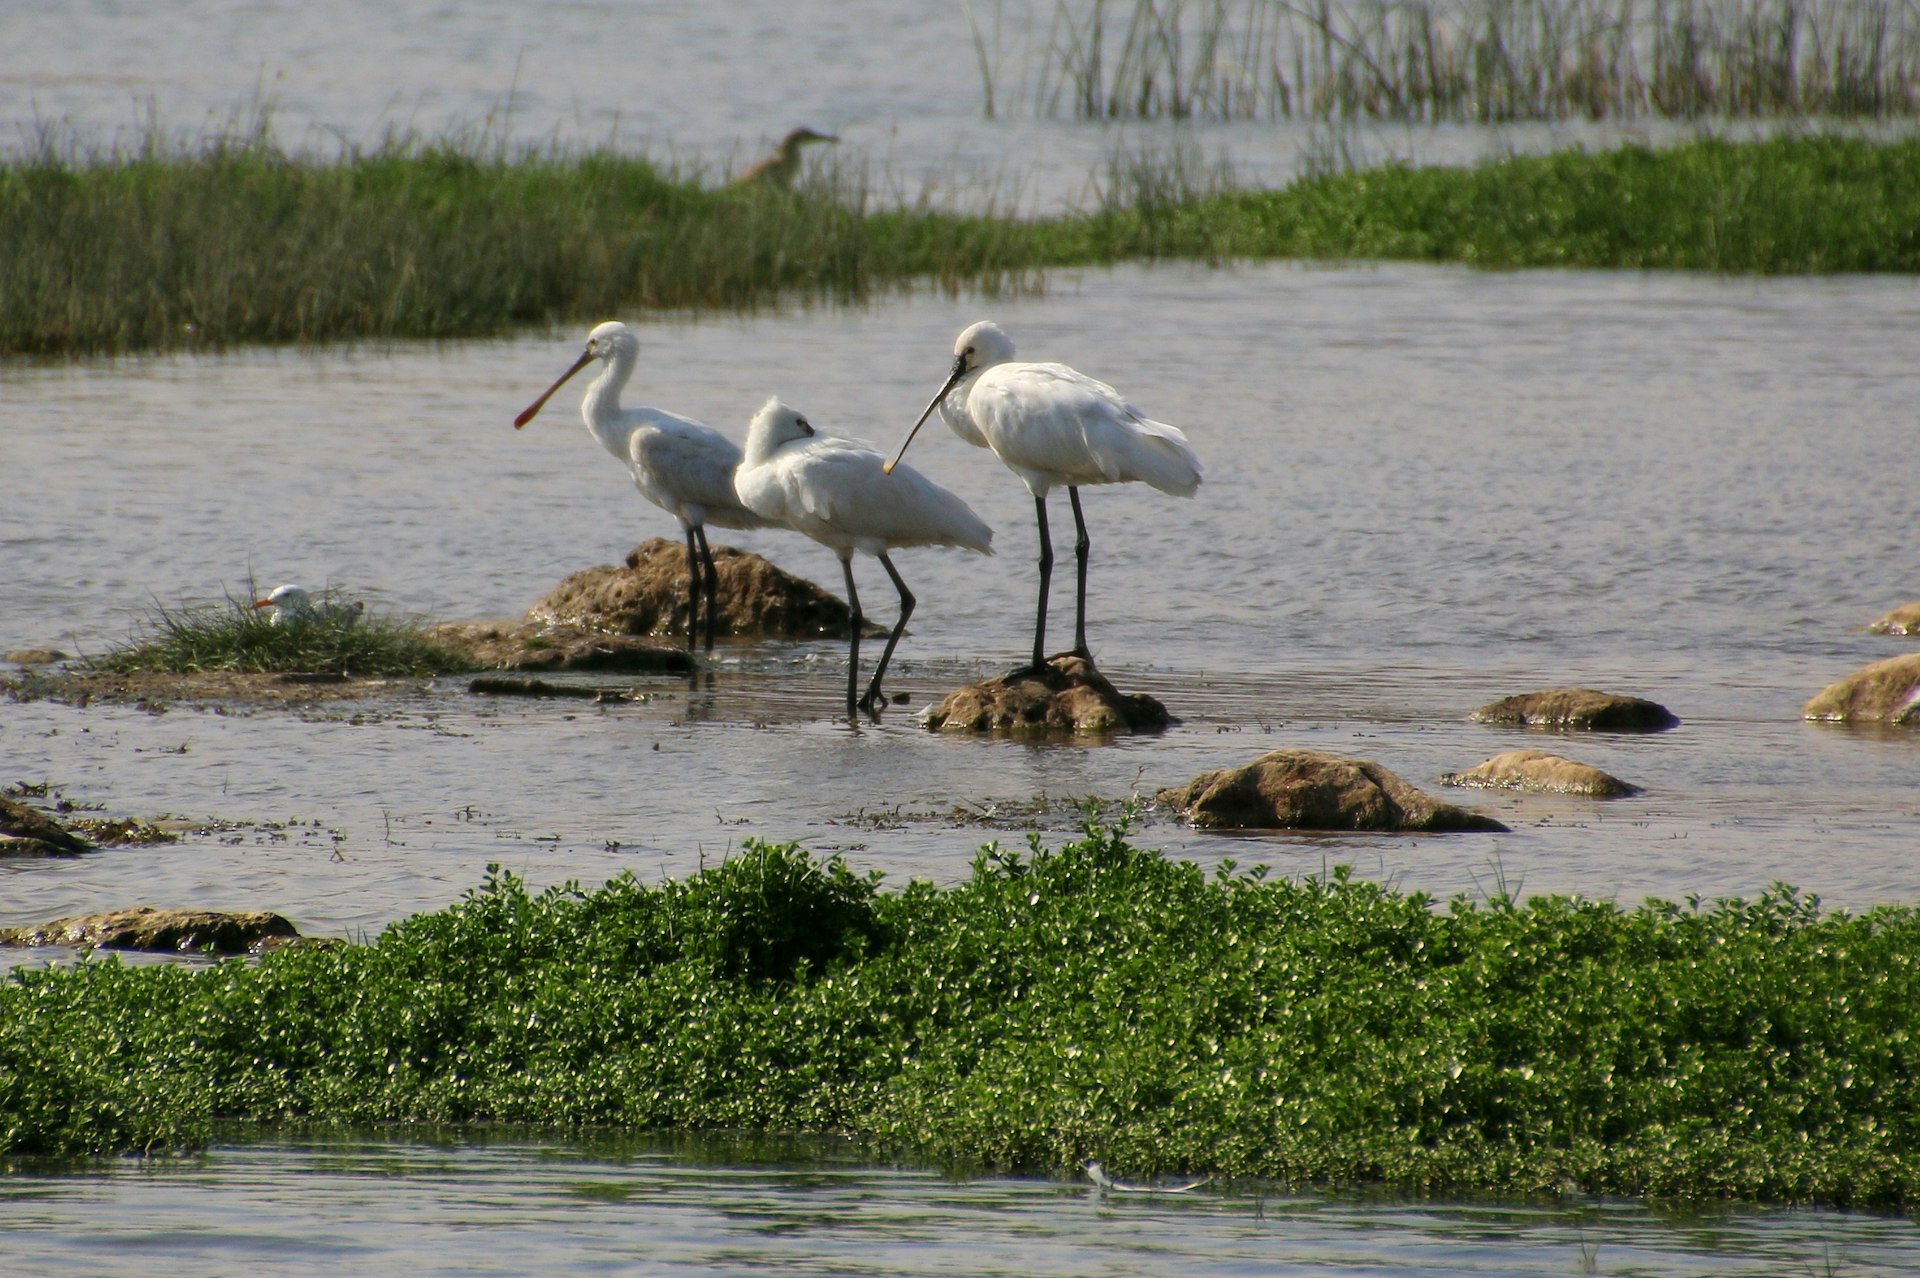 A trio of spoonbills standing in the water in Khor Rori nature reserve, Oman